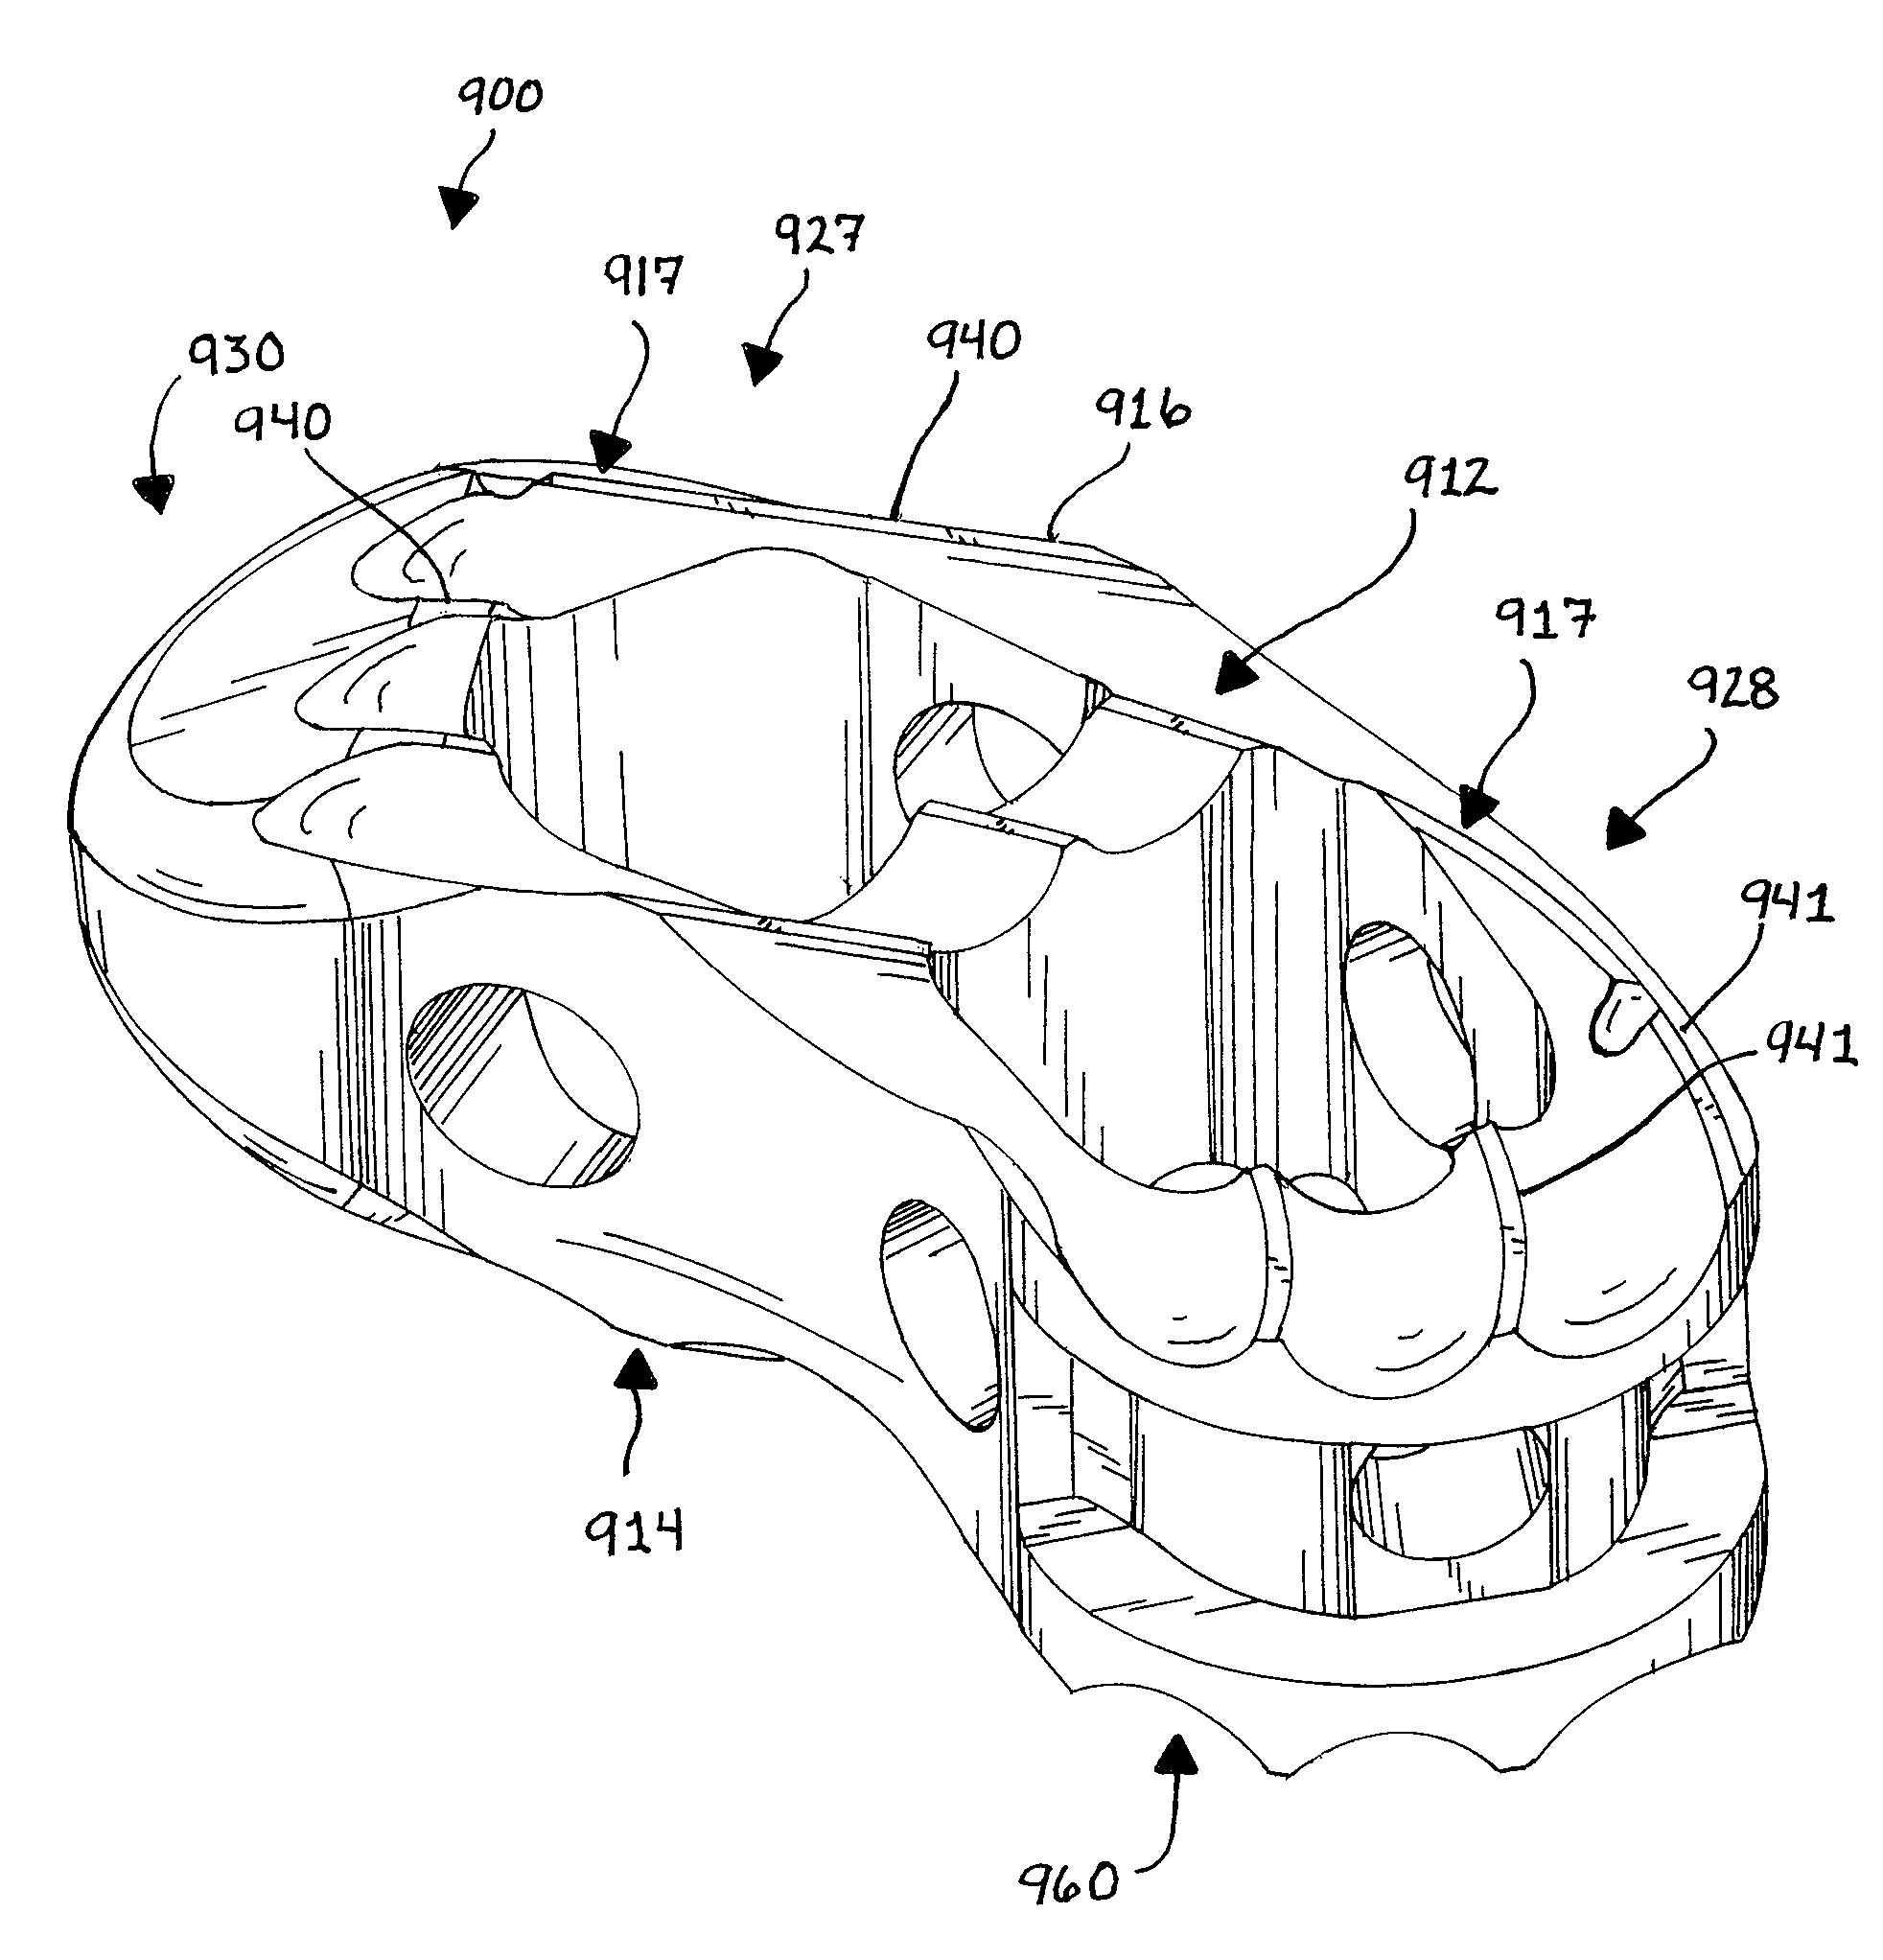 Spinal stabilization device and methods